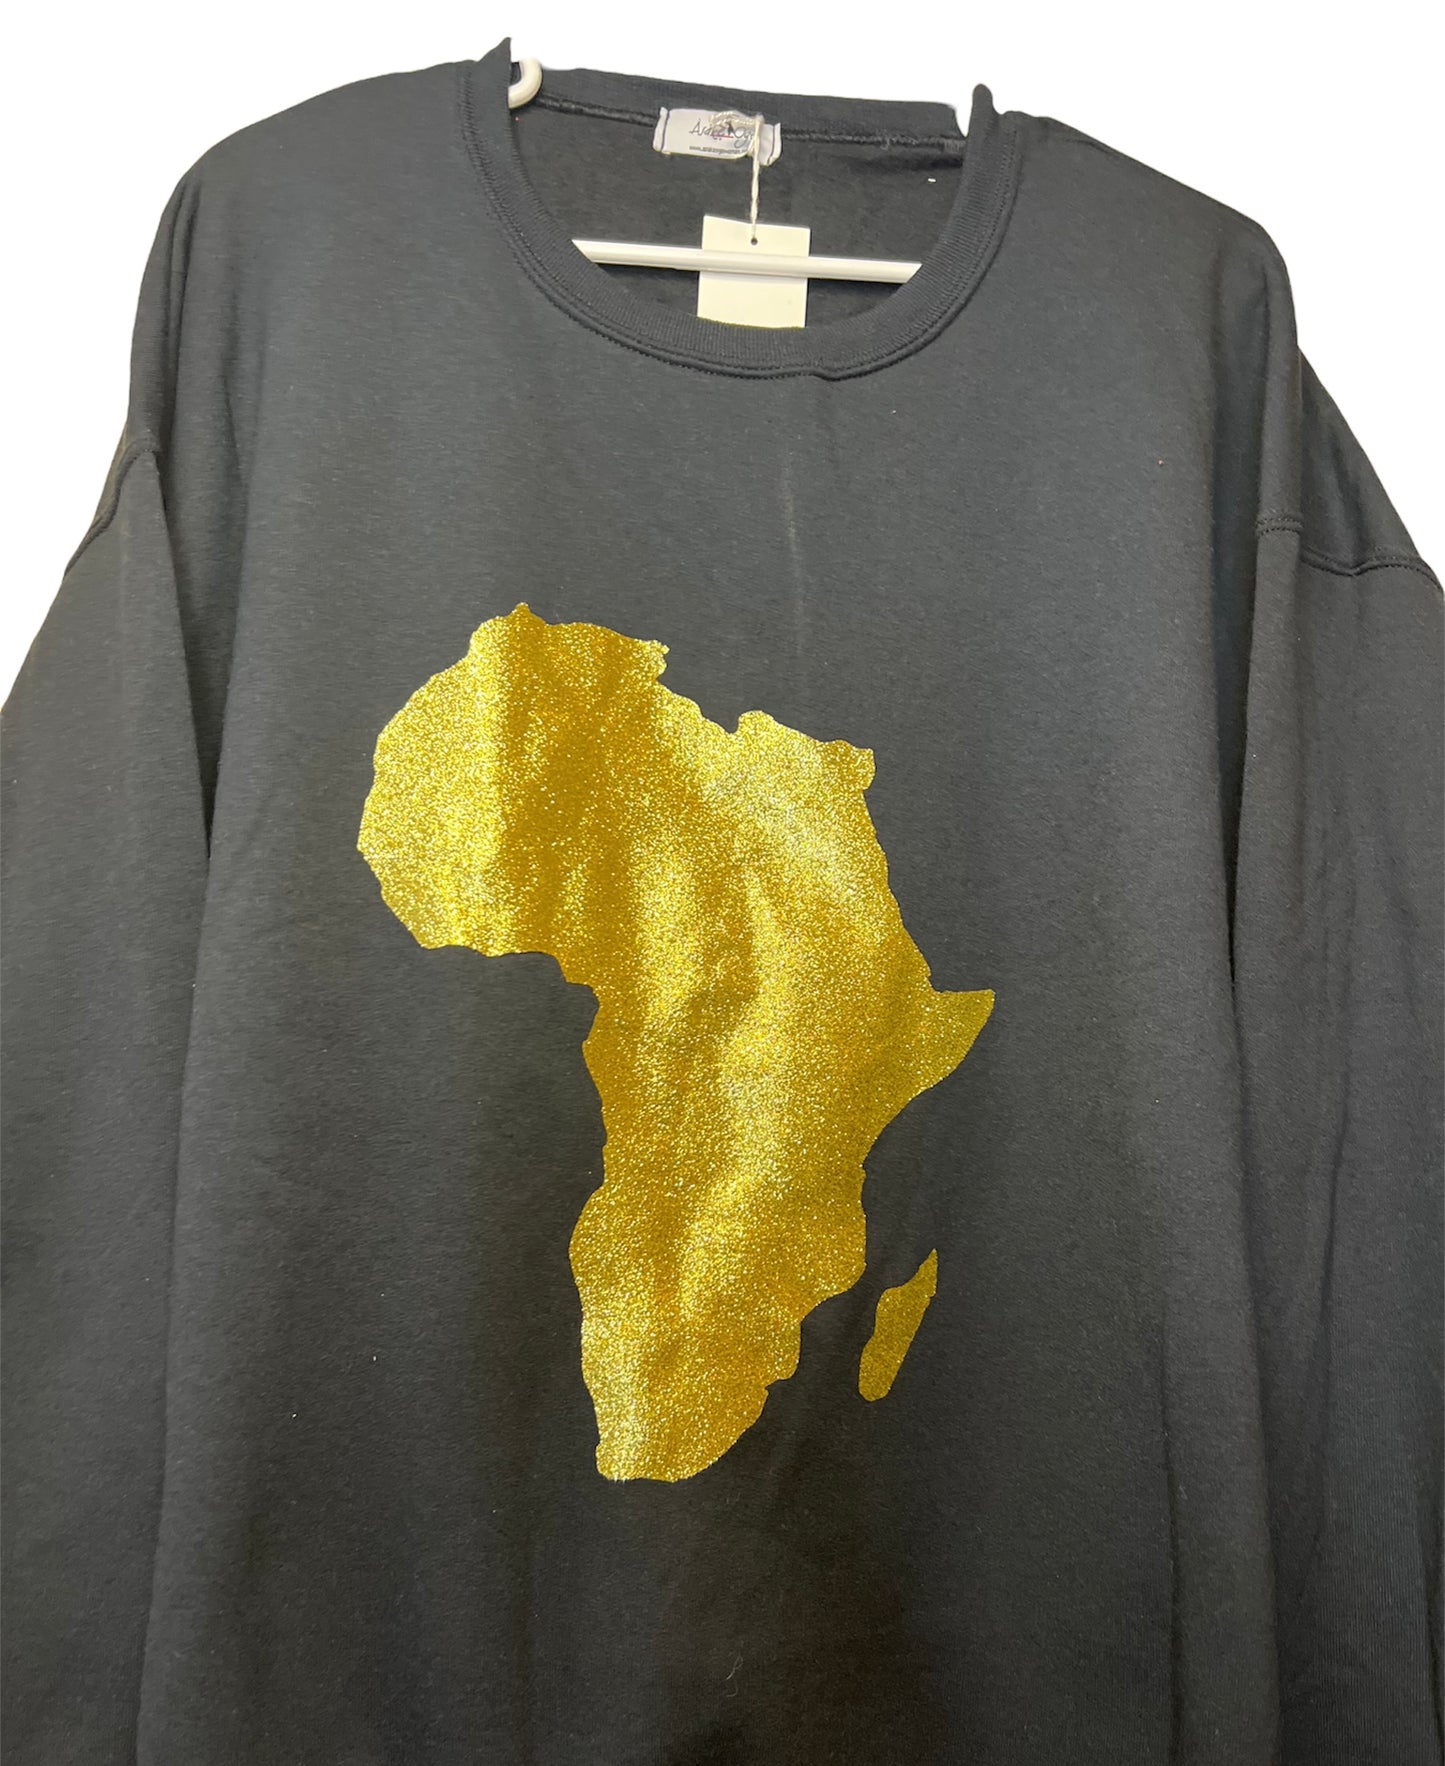 Black Long Sleeve Sweatshirt with Glitter Gold African Map